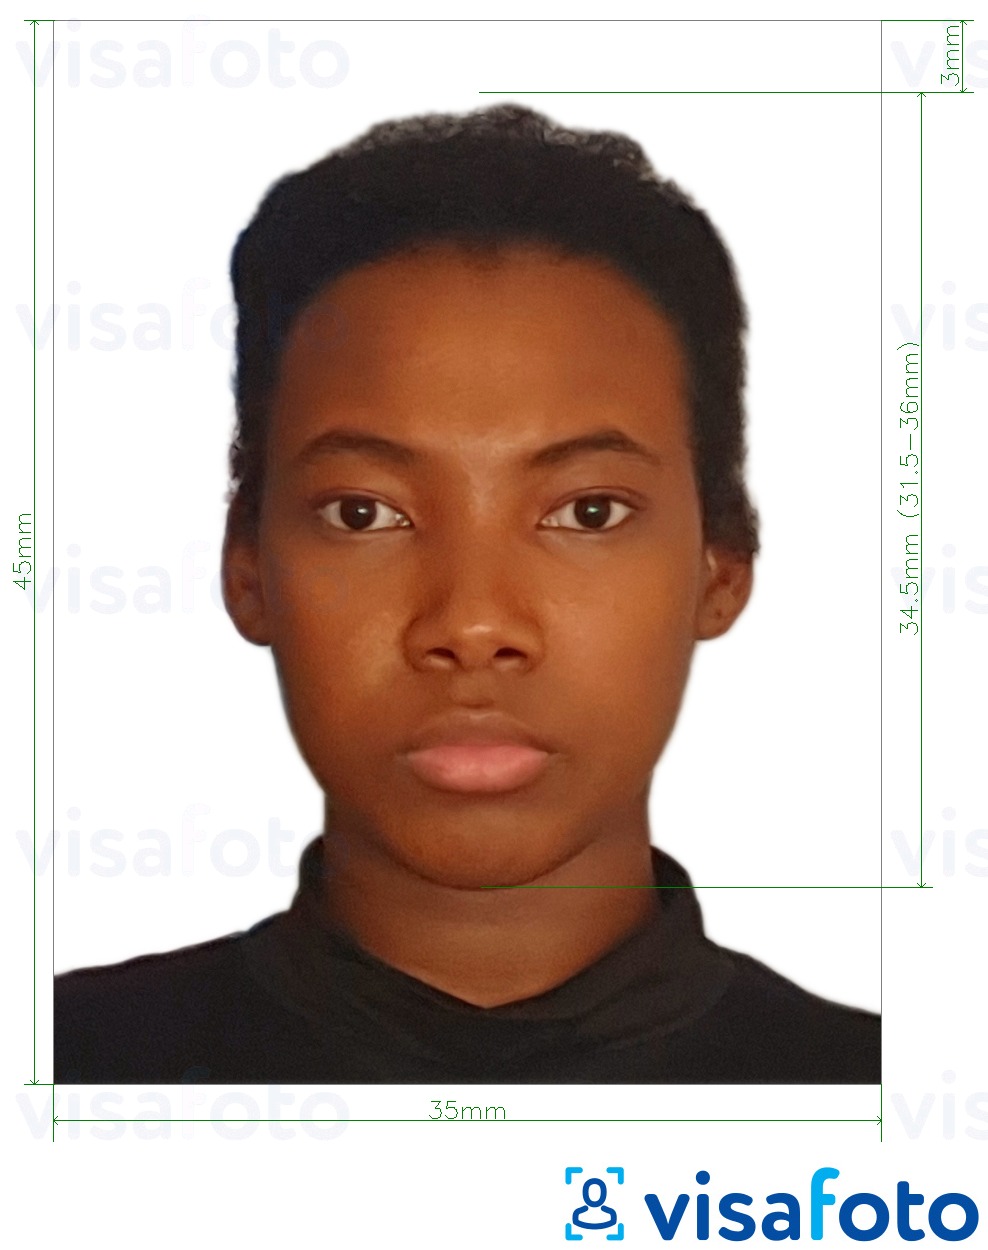 Example of photo for Benin visa 3.5x4.5 cm (35x45 mm) with exact size specification